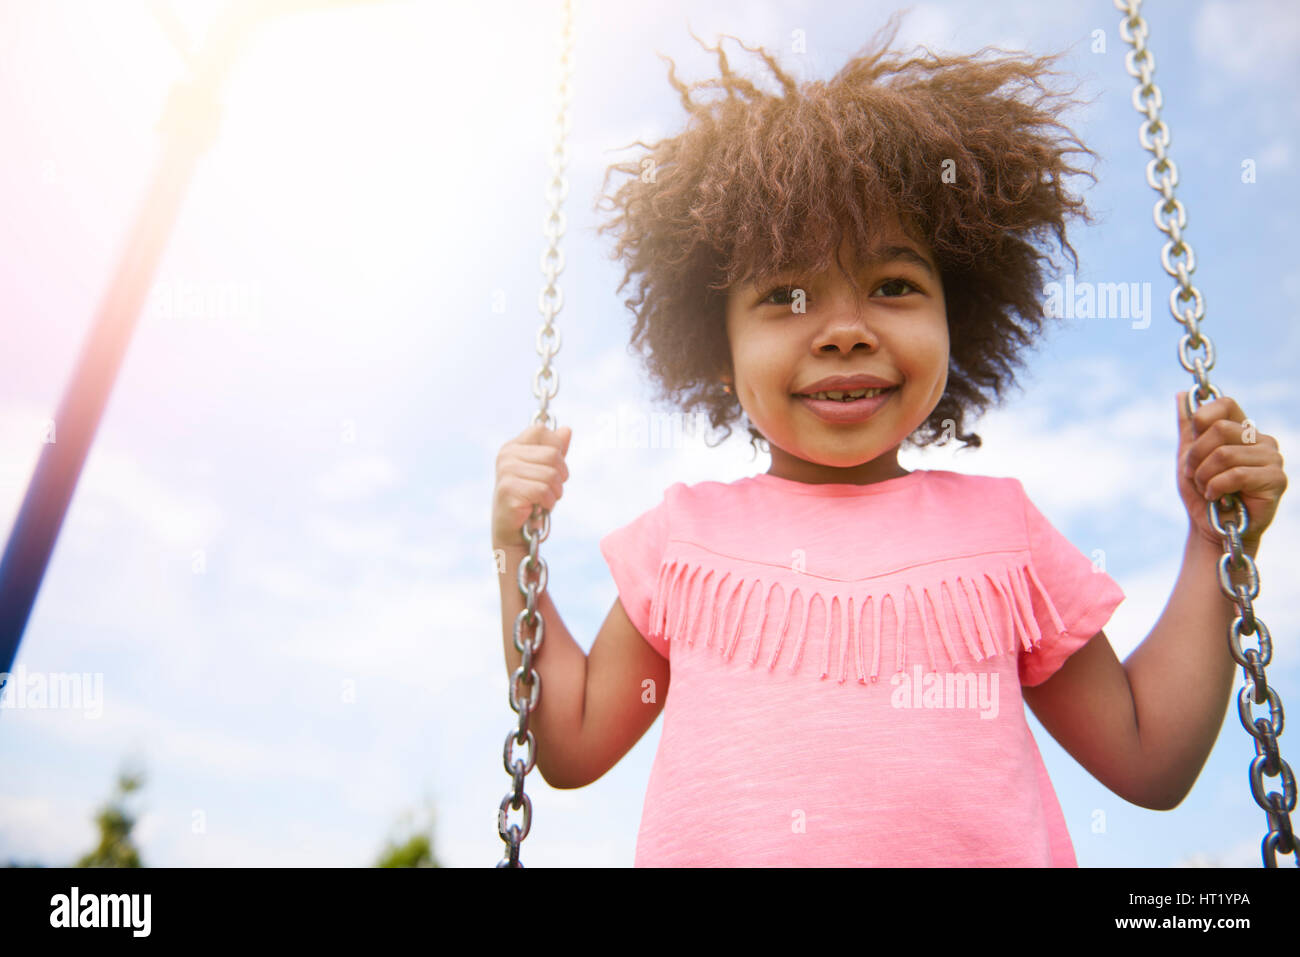 Cute little girl swinging in sunny day Stock Photo